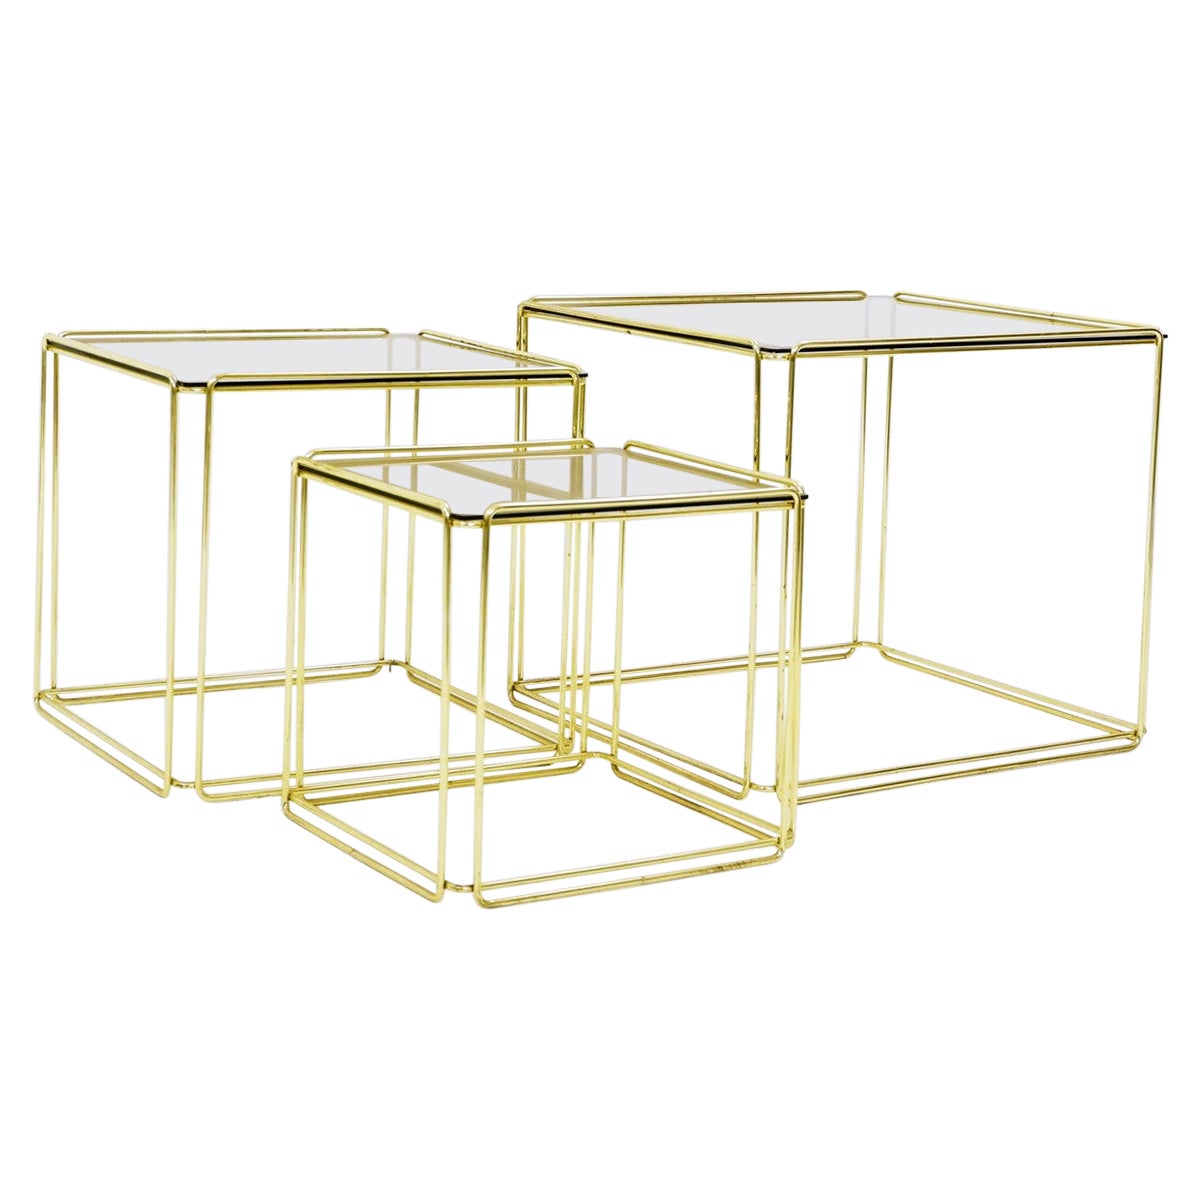 Set of Three ‘Isocèle’ Gold Nesting Tables by Max Sauze in for Atrow, 1970s